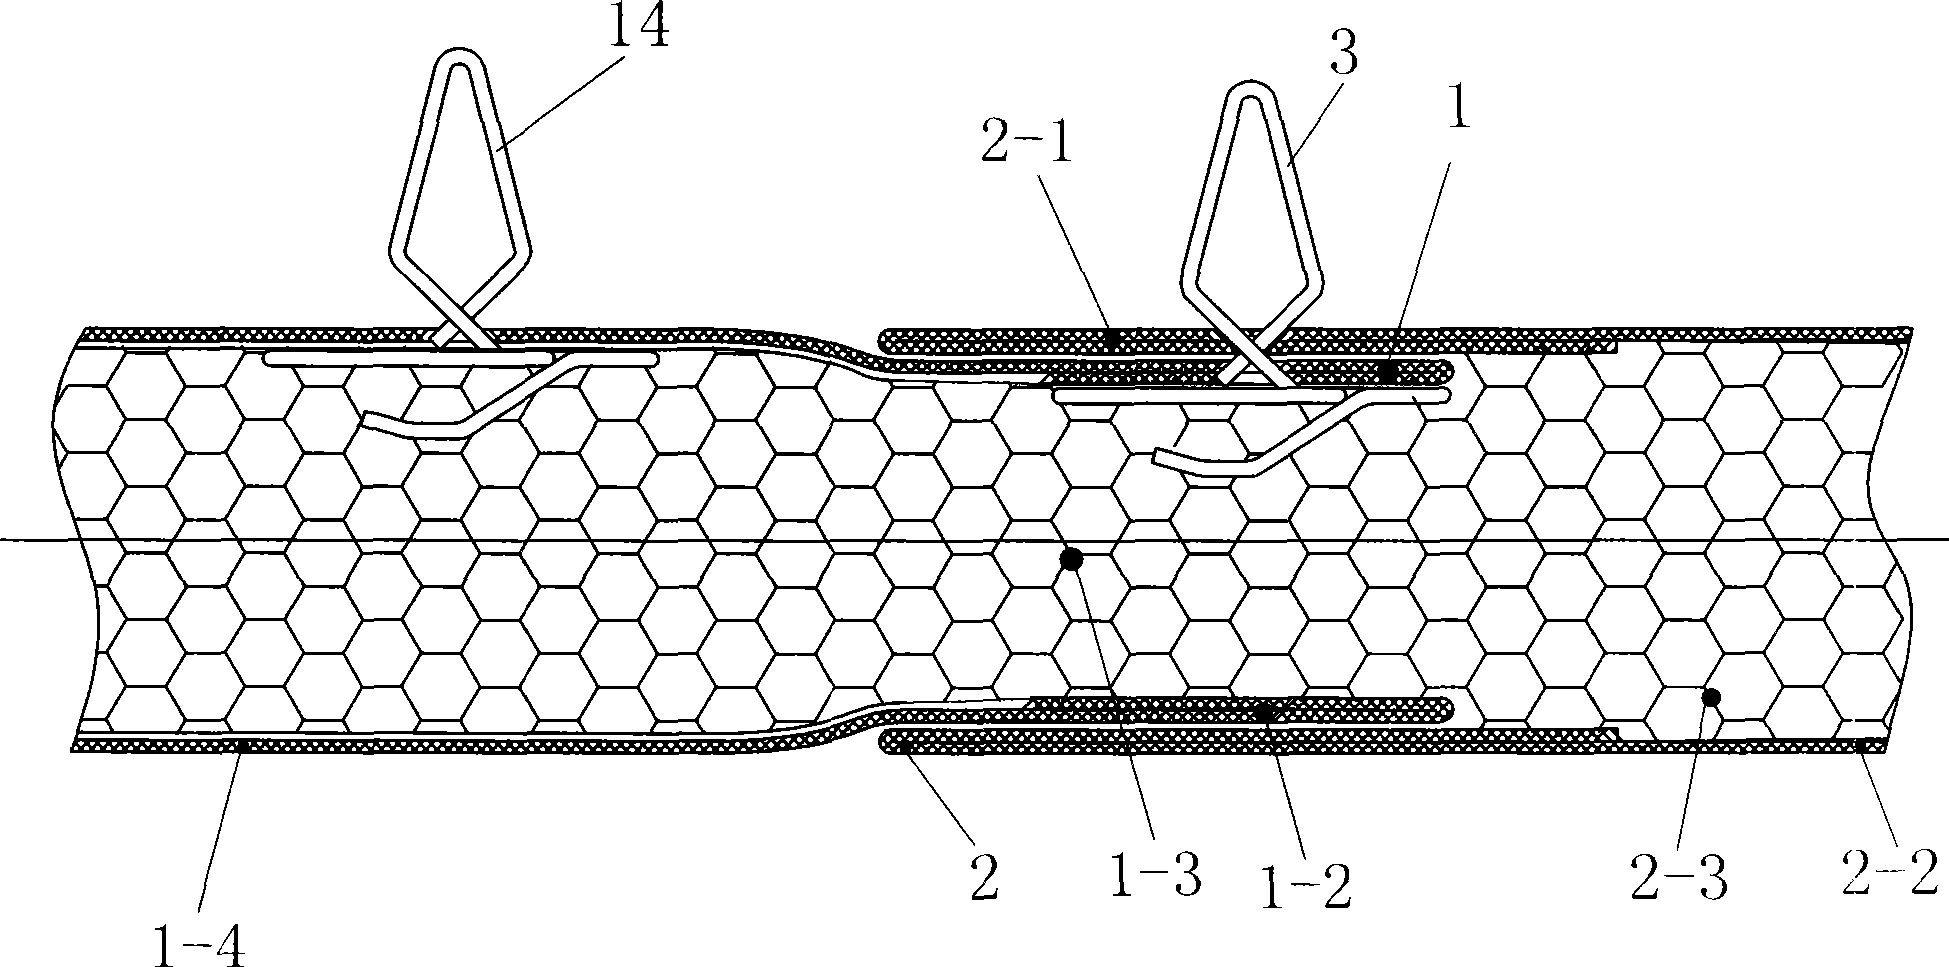 Liner with connecting structure from beginning to end